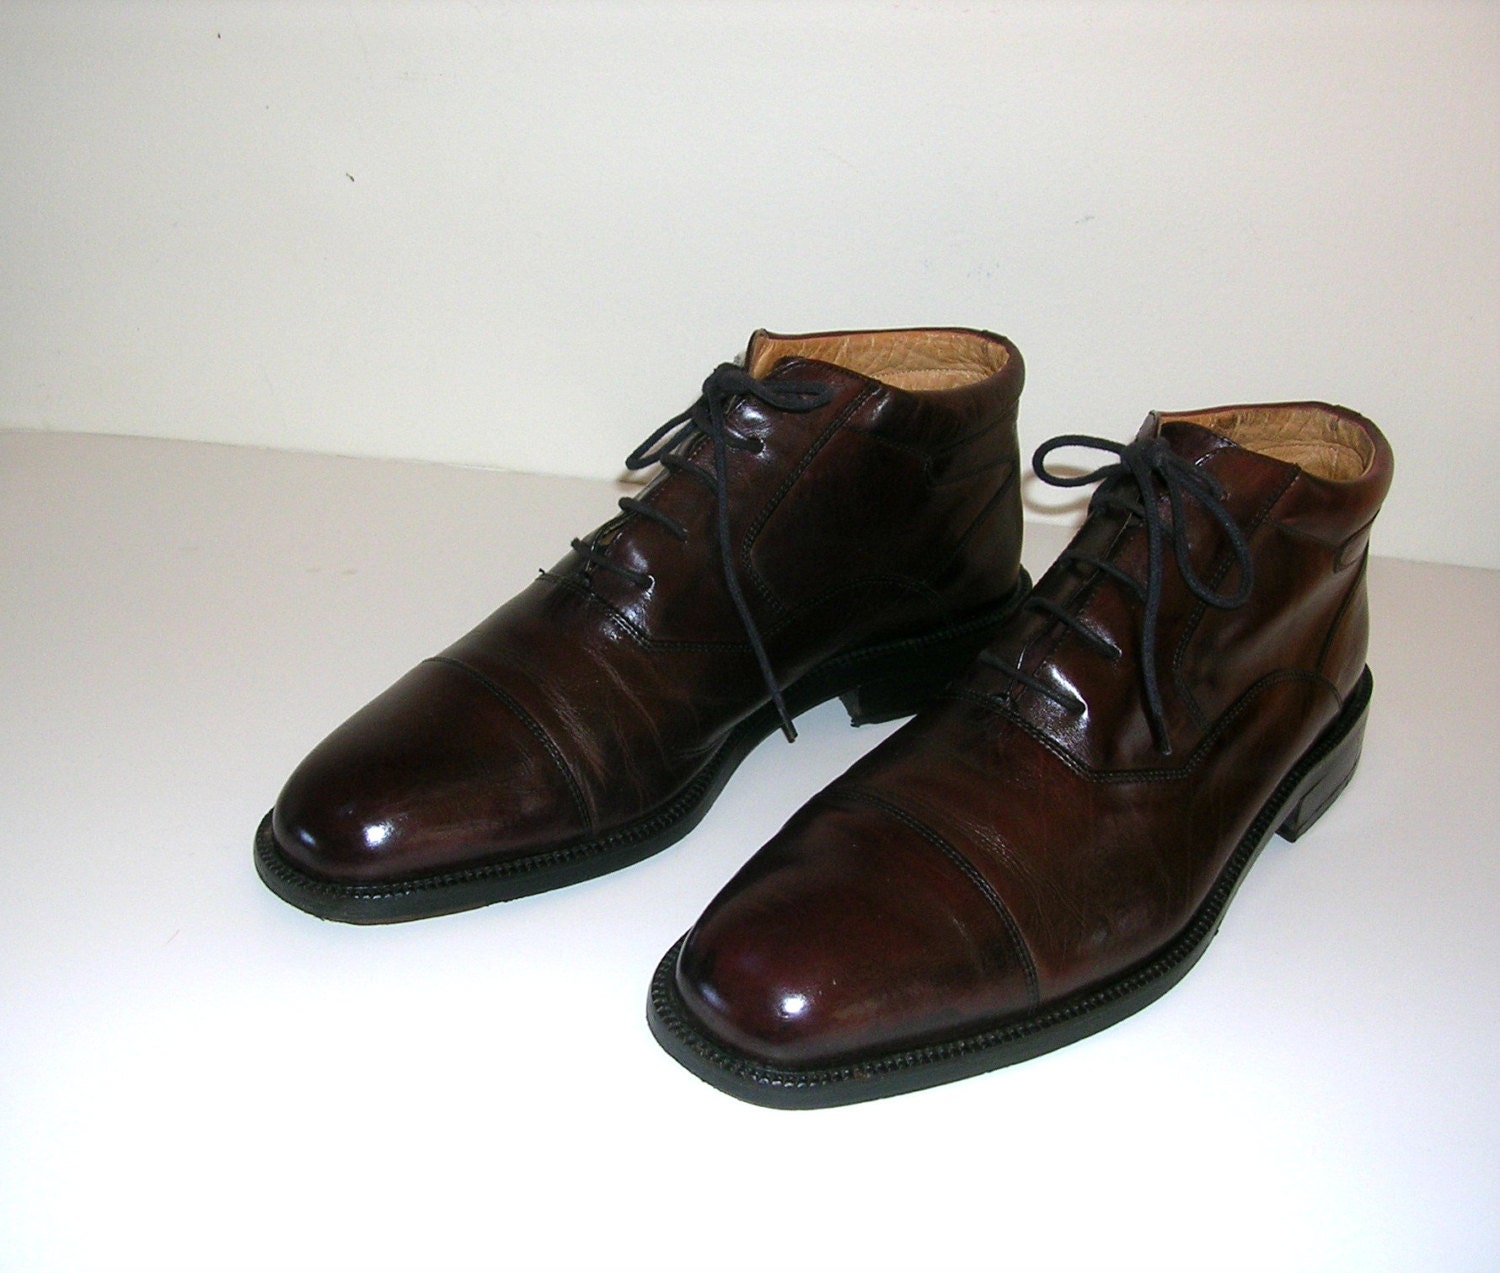 Johnson & Murphy 8 1/2 M Refurbished Vintage Brown Leather Shoes Ankle Cap Toe Boots Great Syle Wonderful Condition Best High Quality - Insideredo